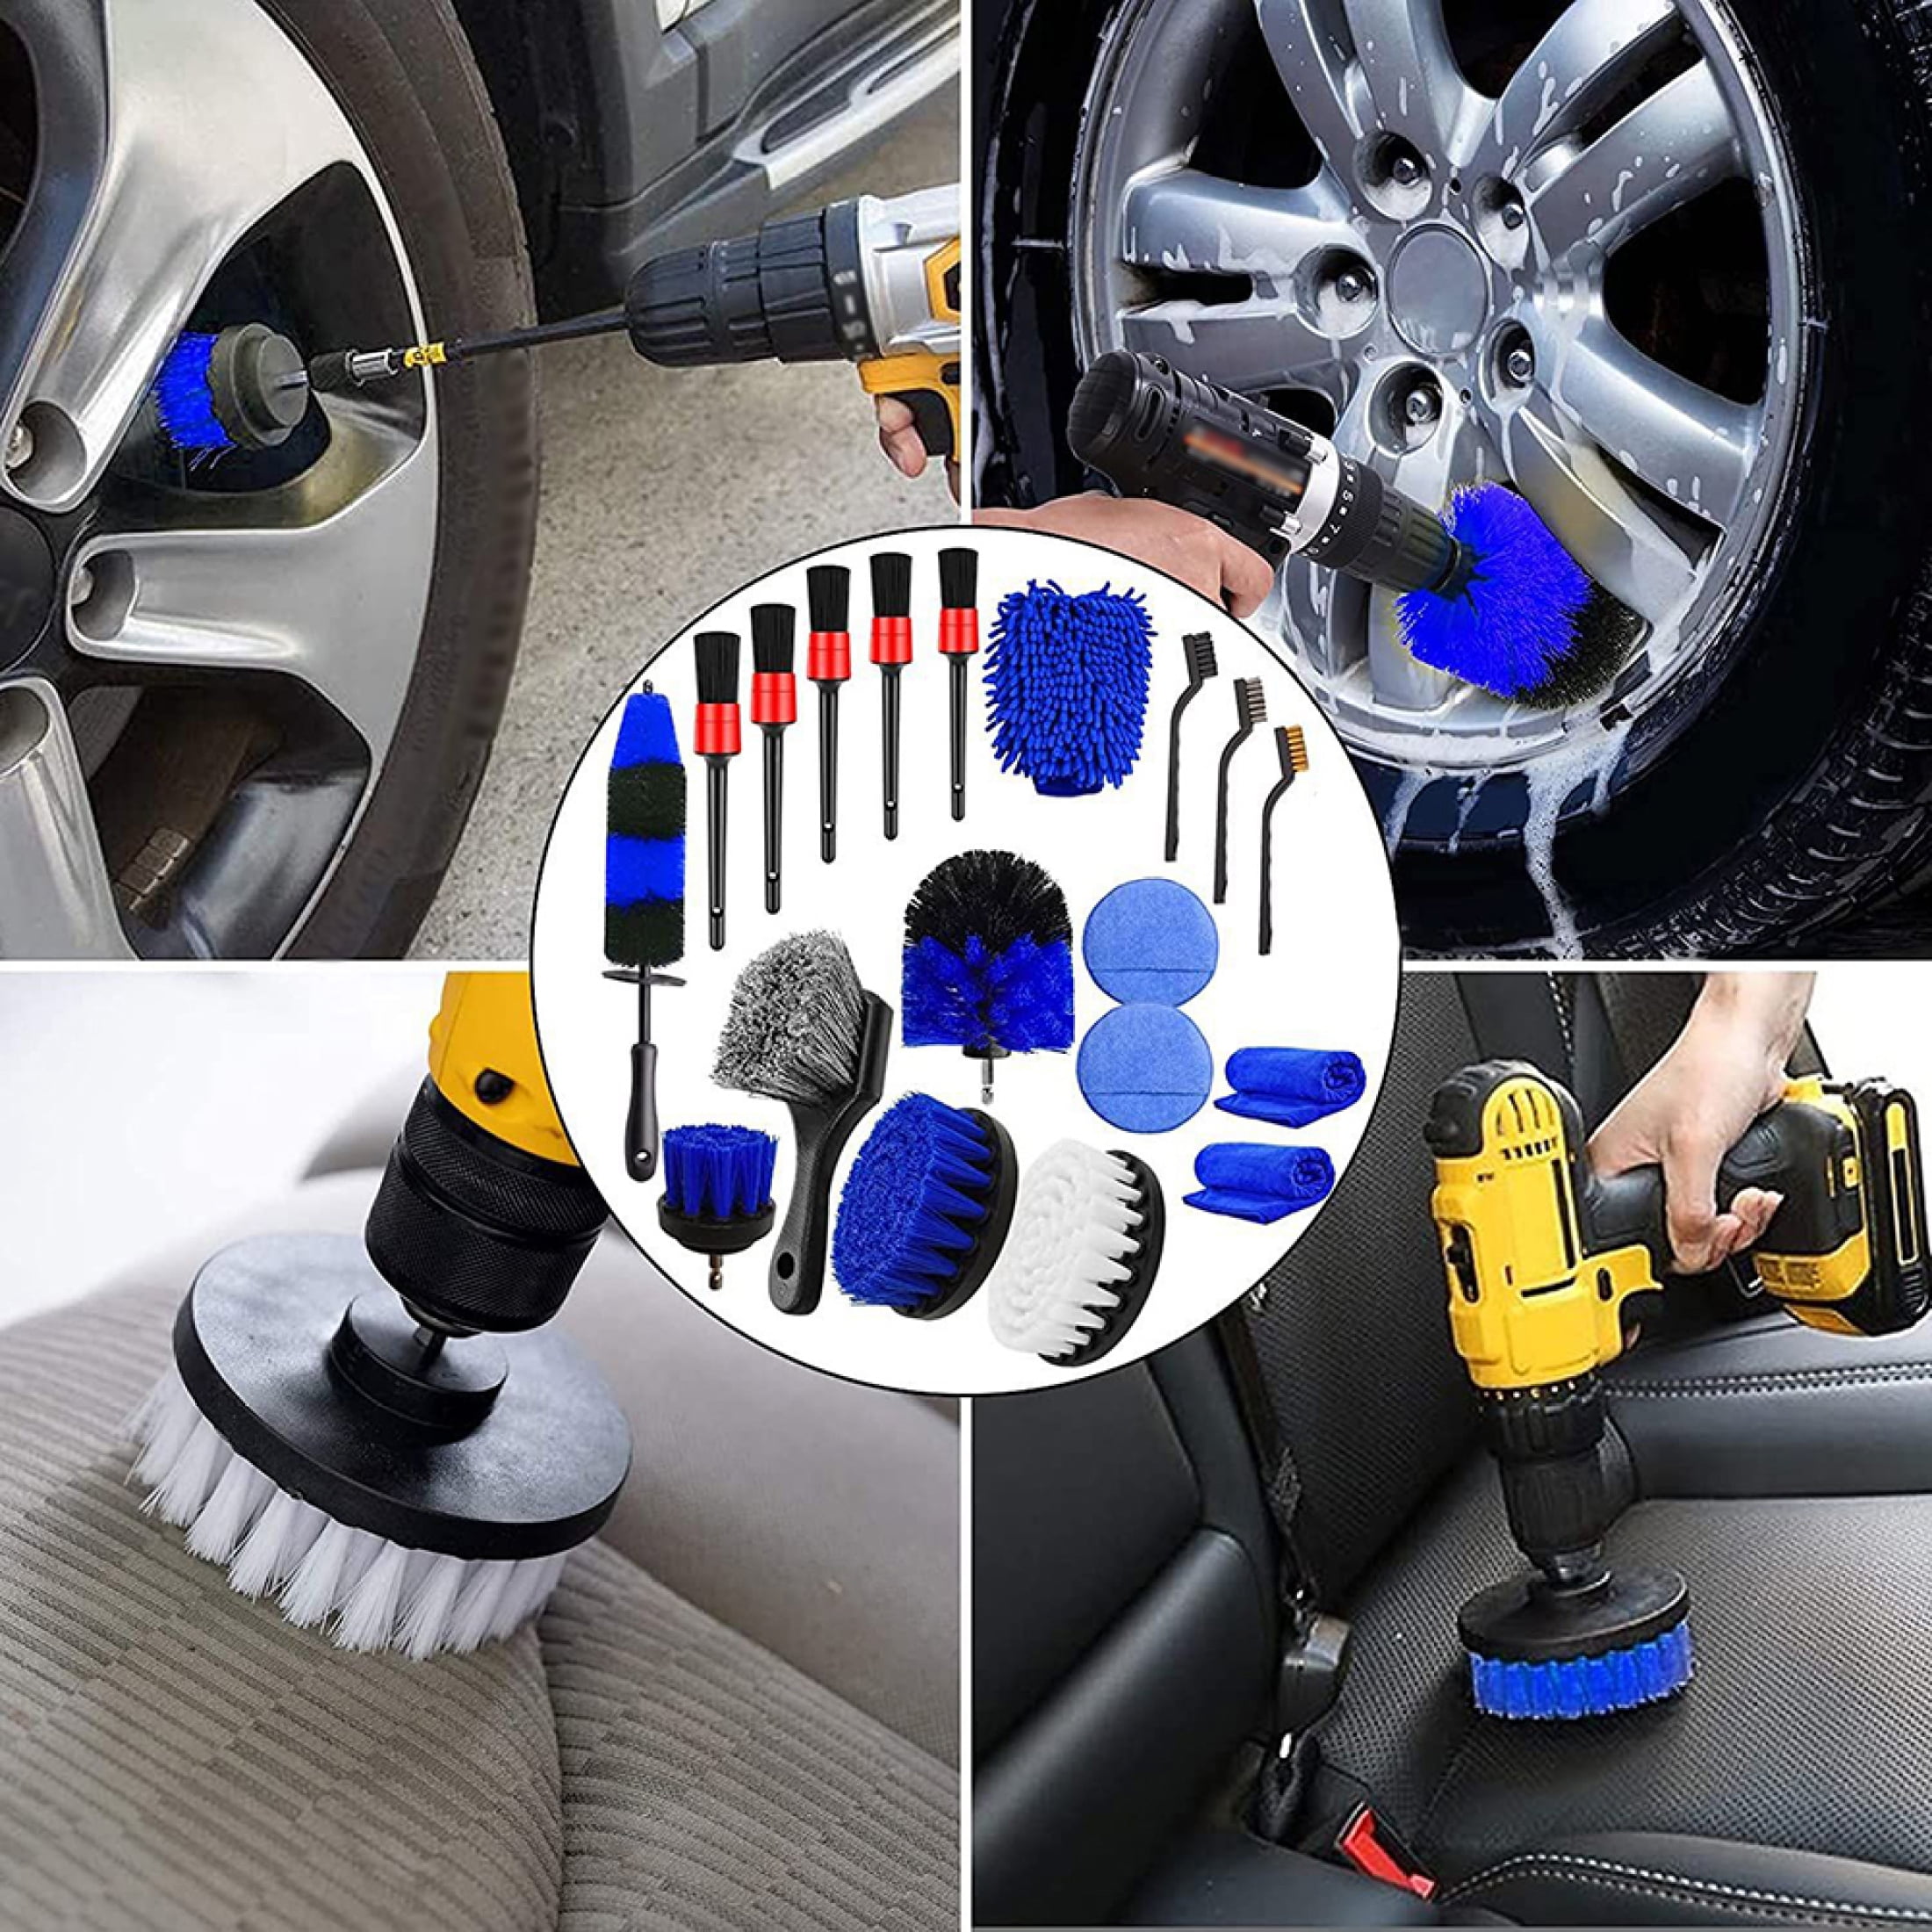 MoreChioce 20Pcs Car Detailing Brush Set Auto Wheel Tire Brushes Set for  Cleaning Wheels Interior Exterior Dashboard Leather Air Vents